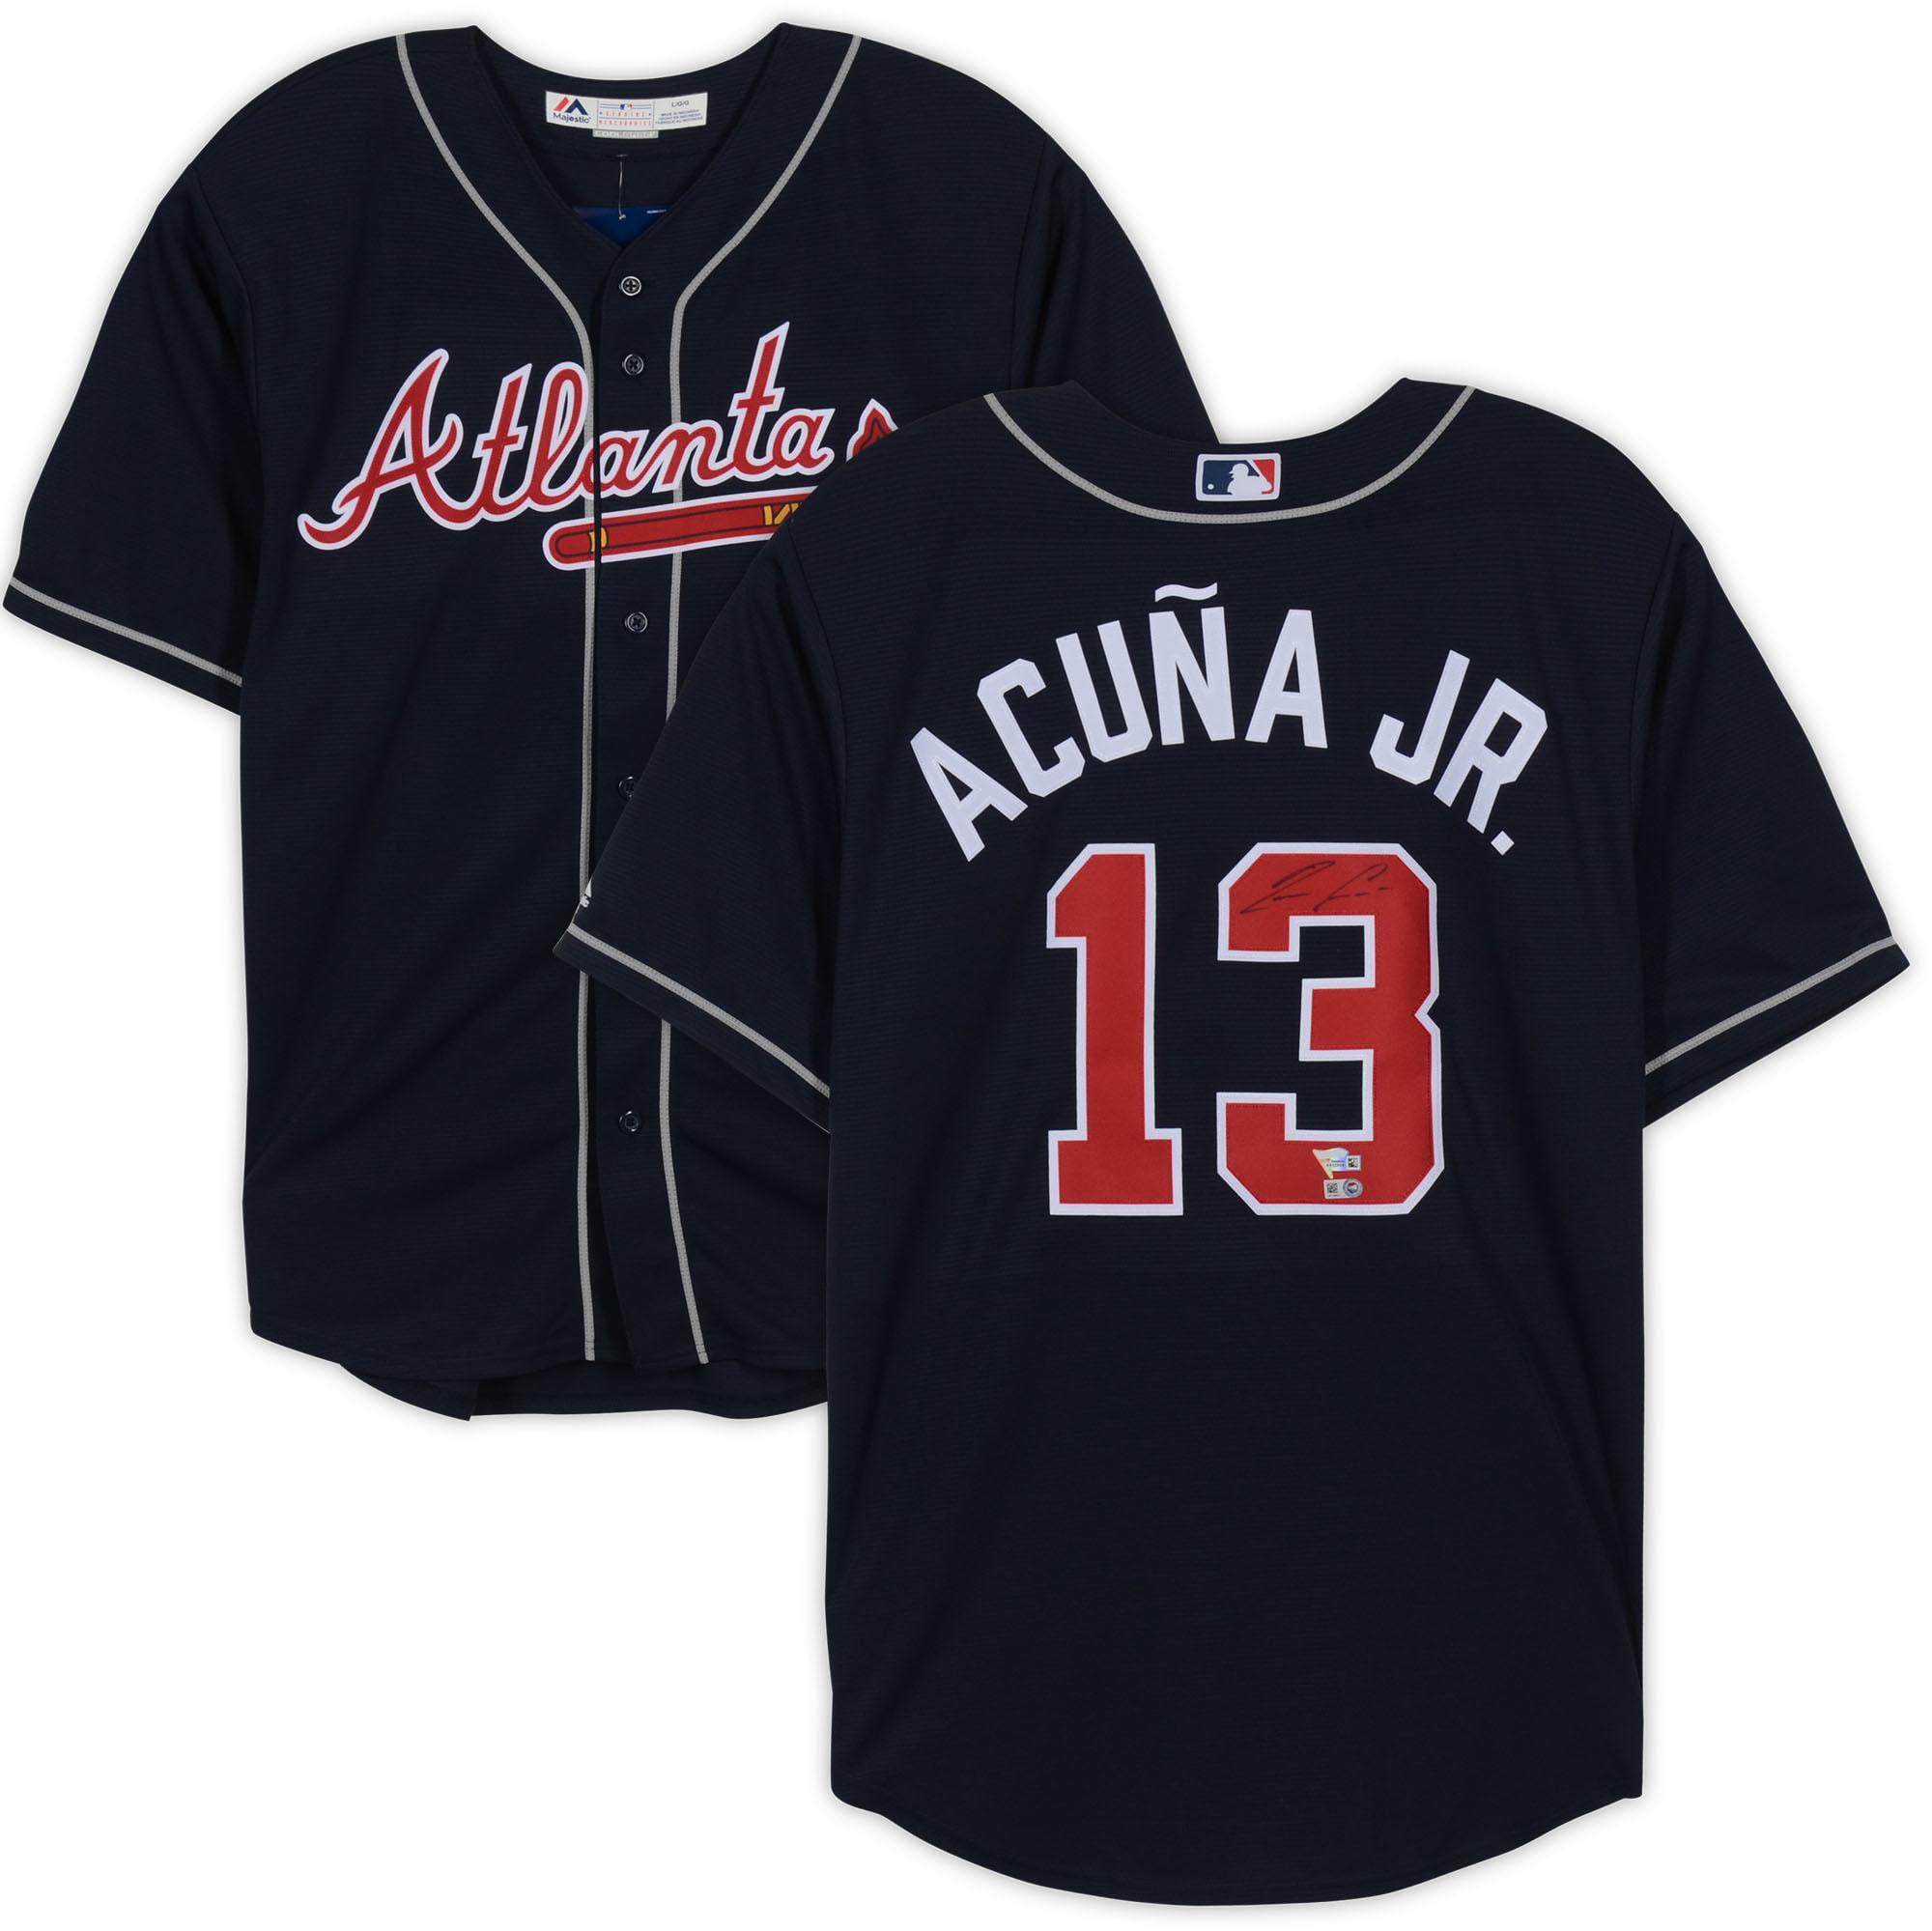 acuna signed jersey